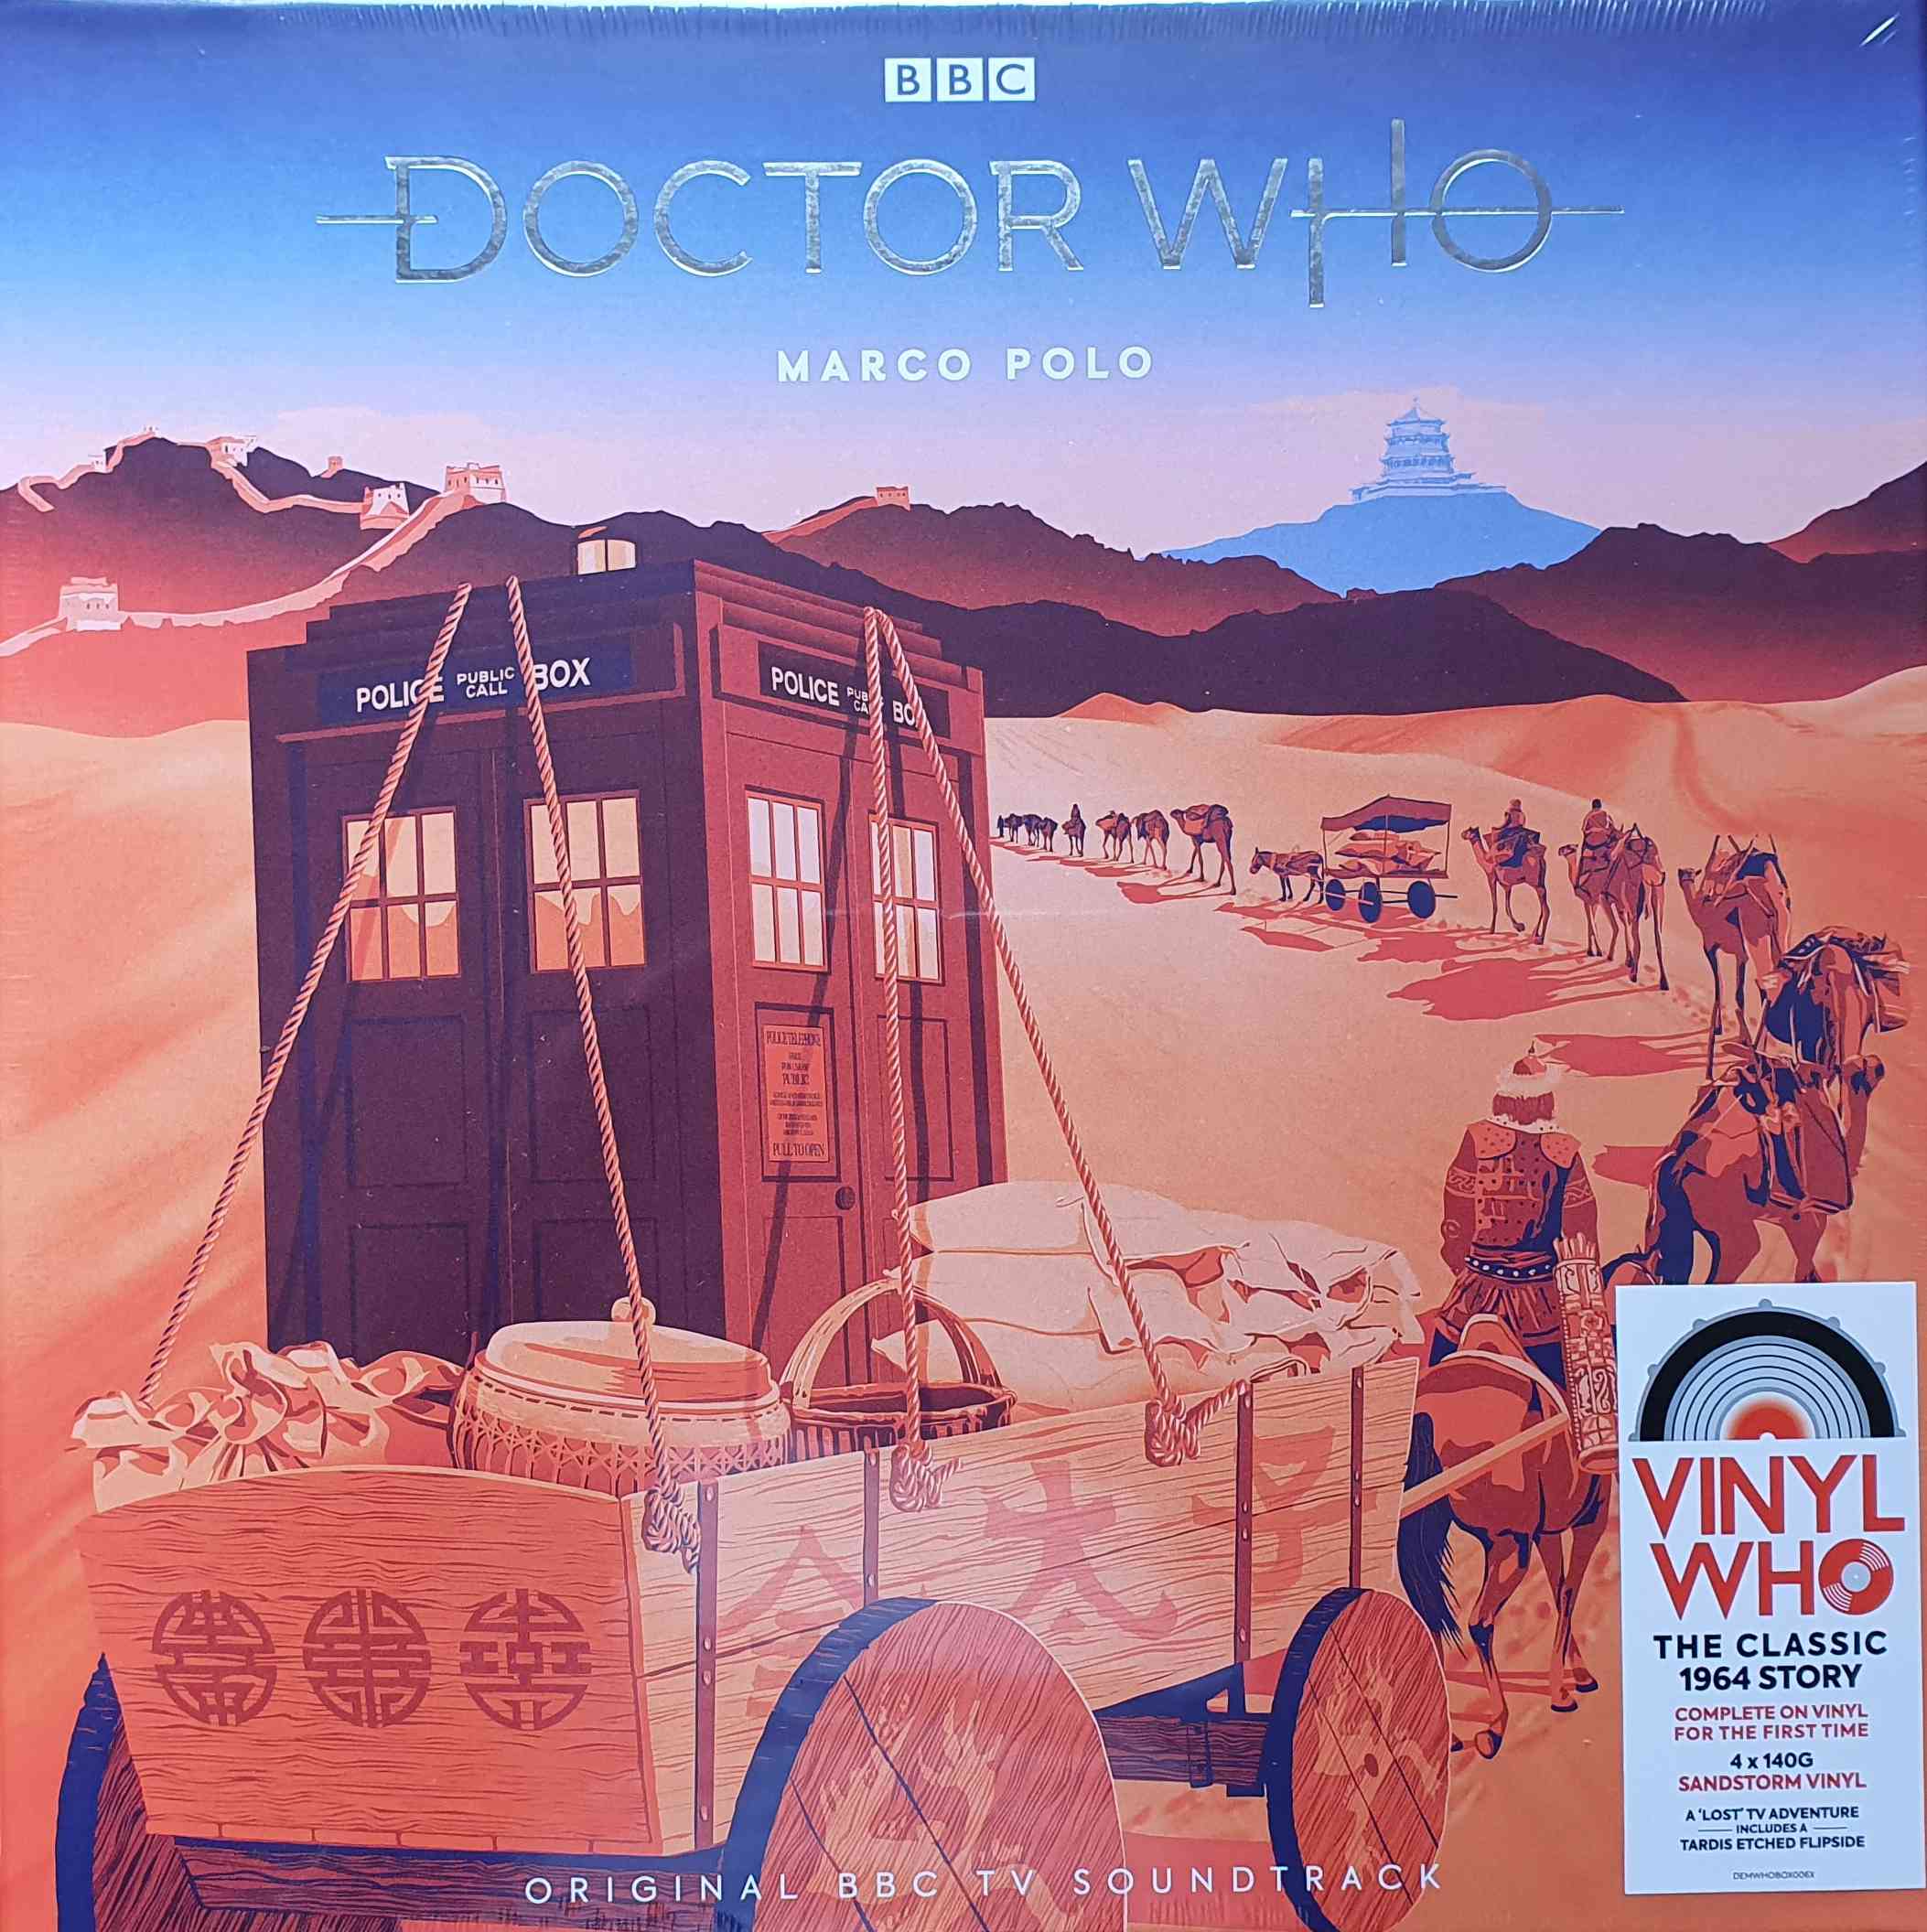 Picture of DEMWHOBOX006X Doctor Who - Marco Polo by artist John Lucarotti from the BBC records and Tapes library